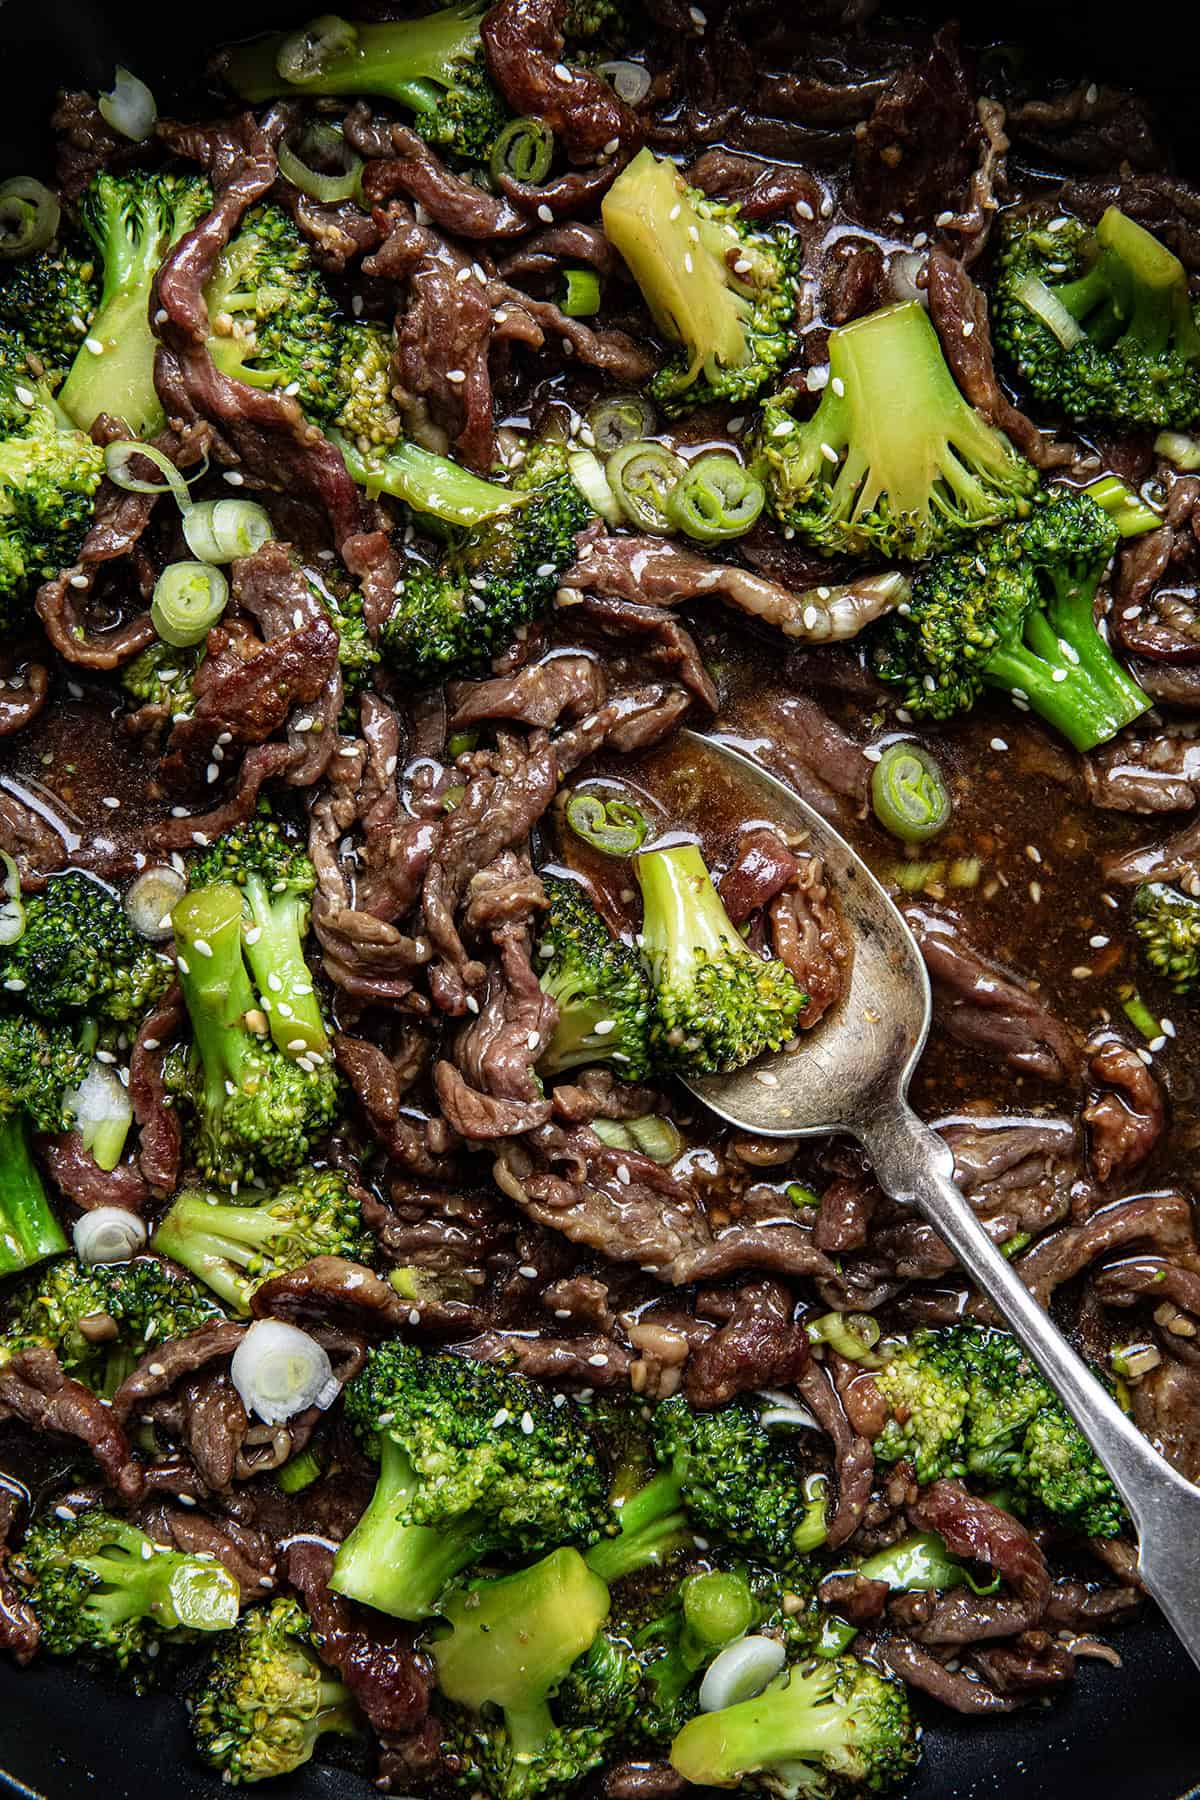 Spoon resting in a pan of Beef and Broccoli.